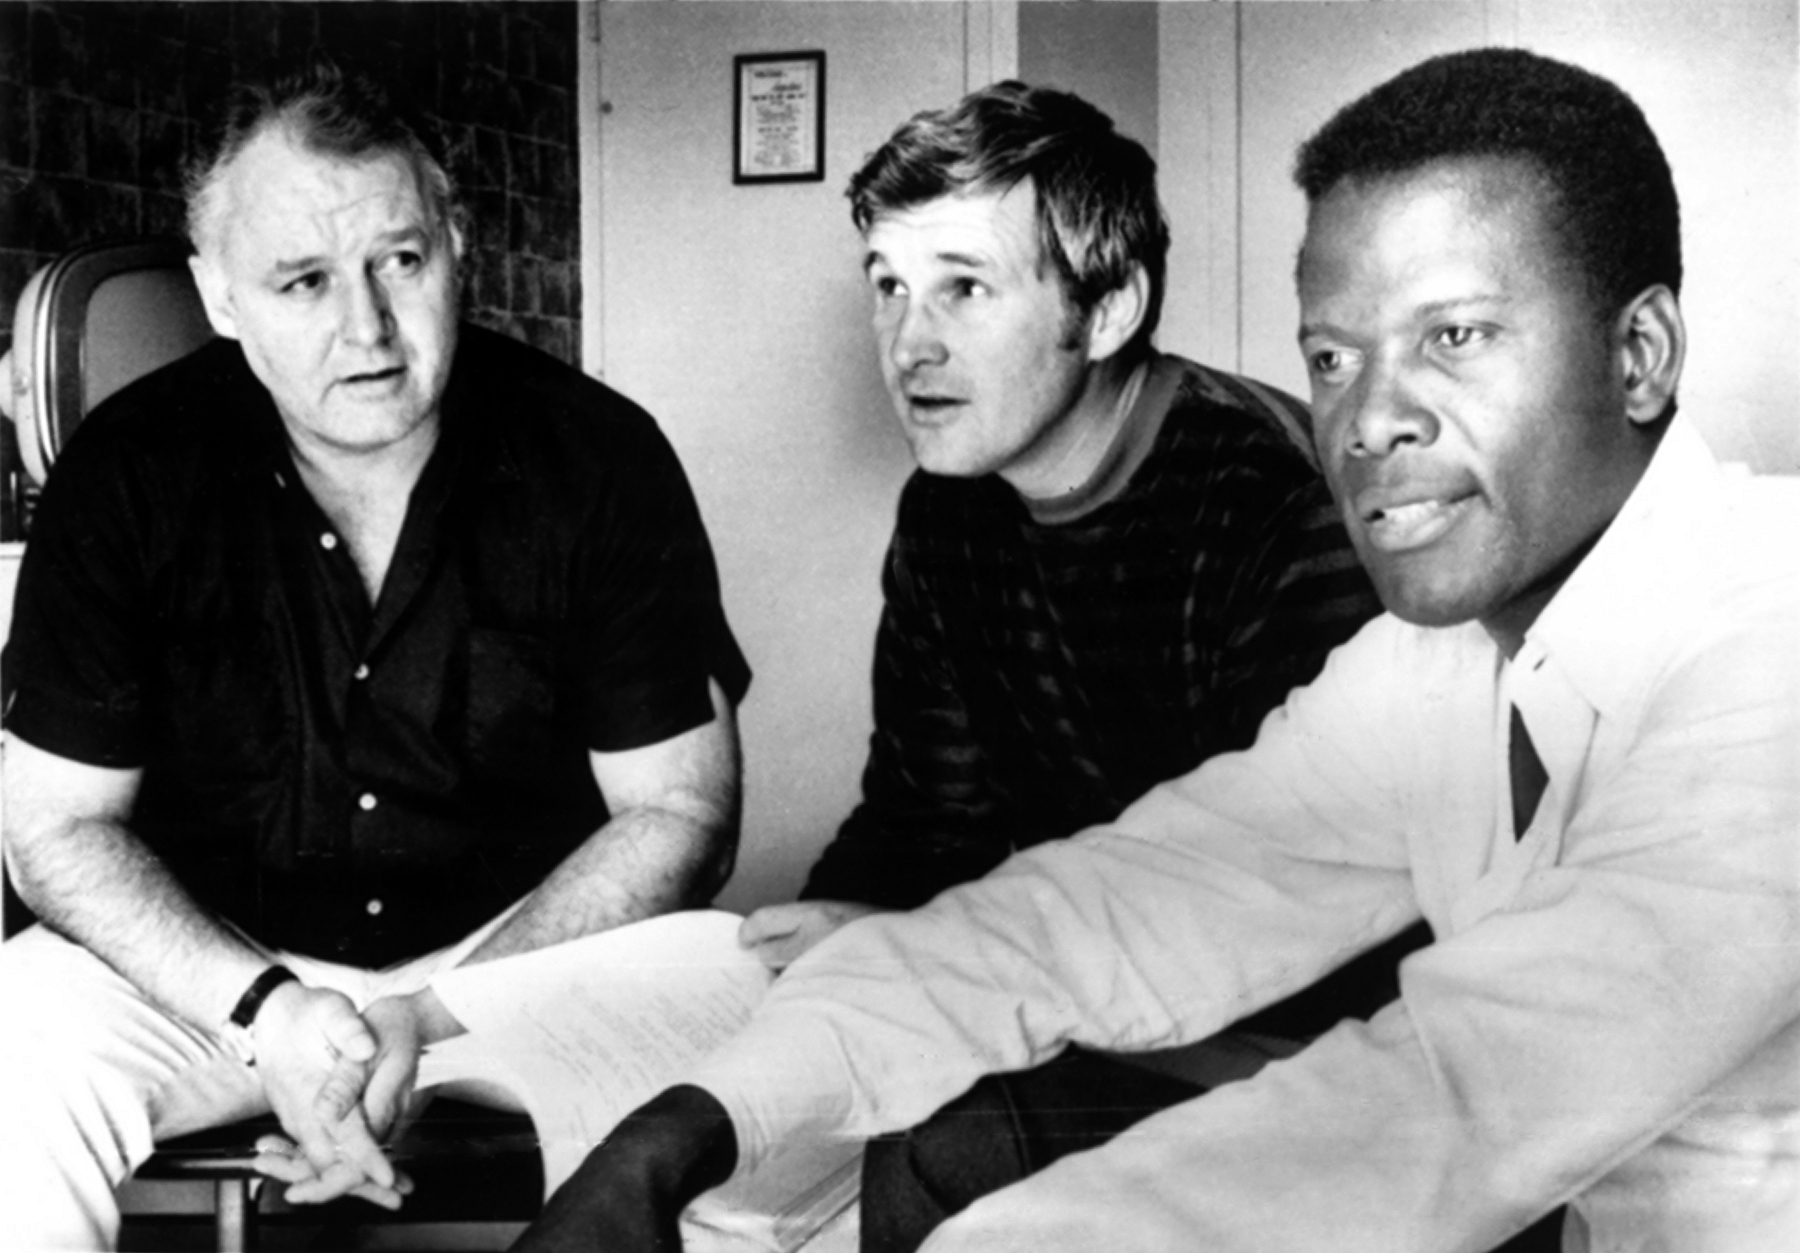 Norman Jewison: Why Sidney Poitier Was Perfect for ‘In the Heat of the Night’